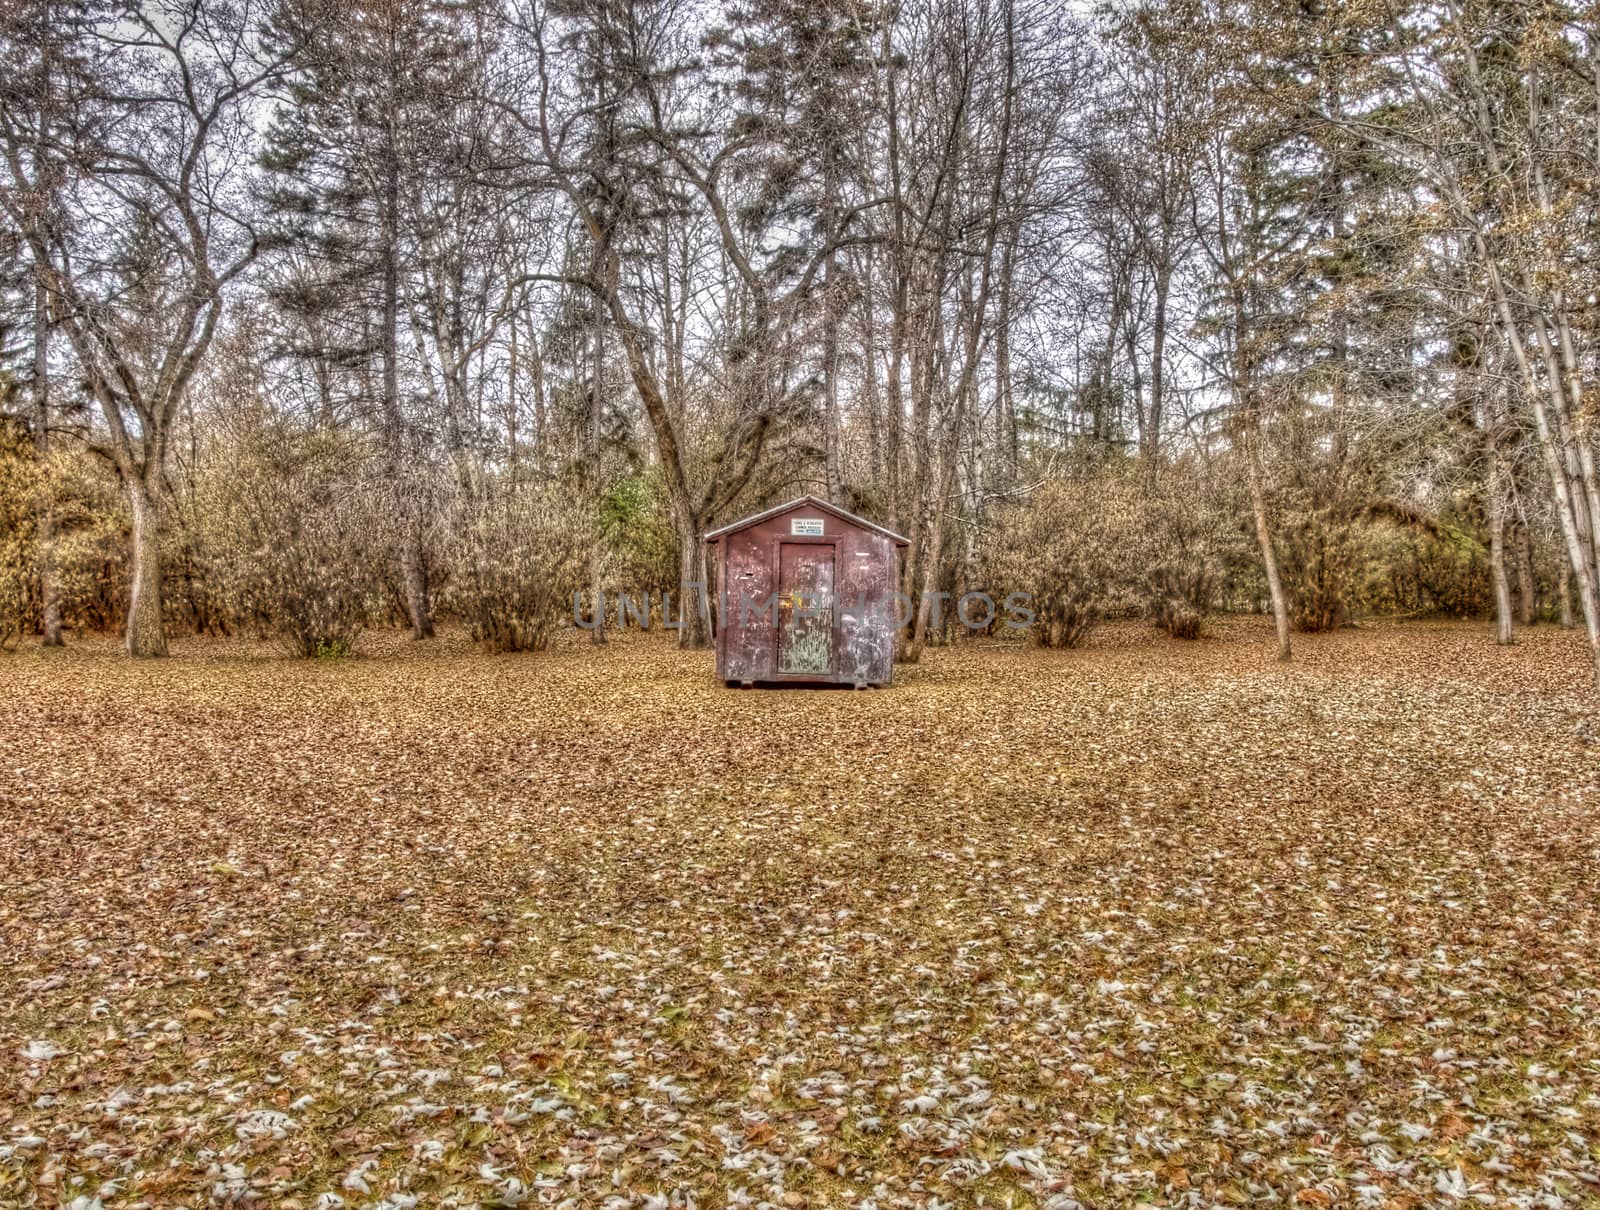 A lone storage shed in the distance along a tree line in Autumn.